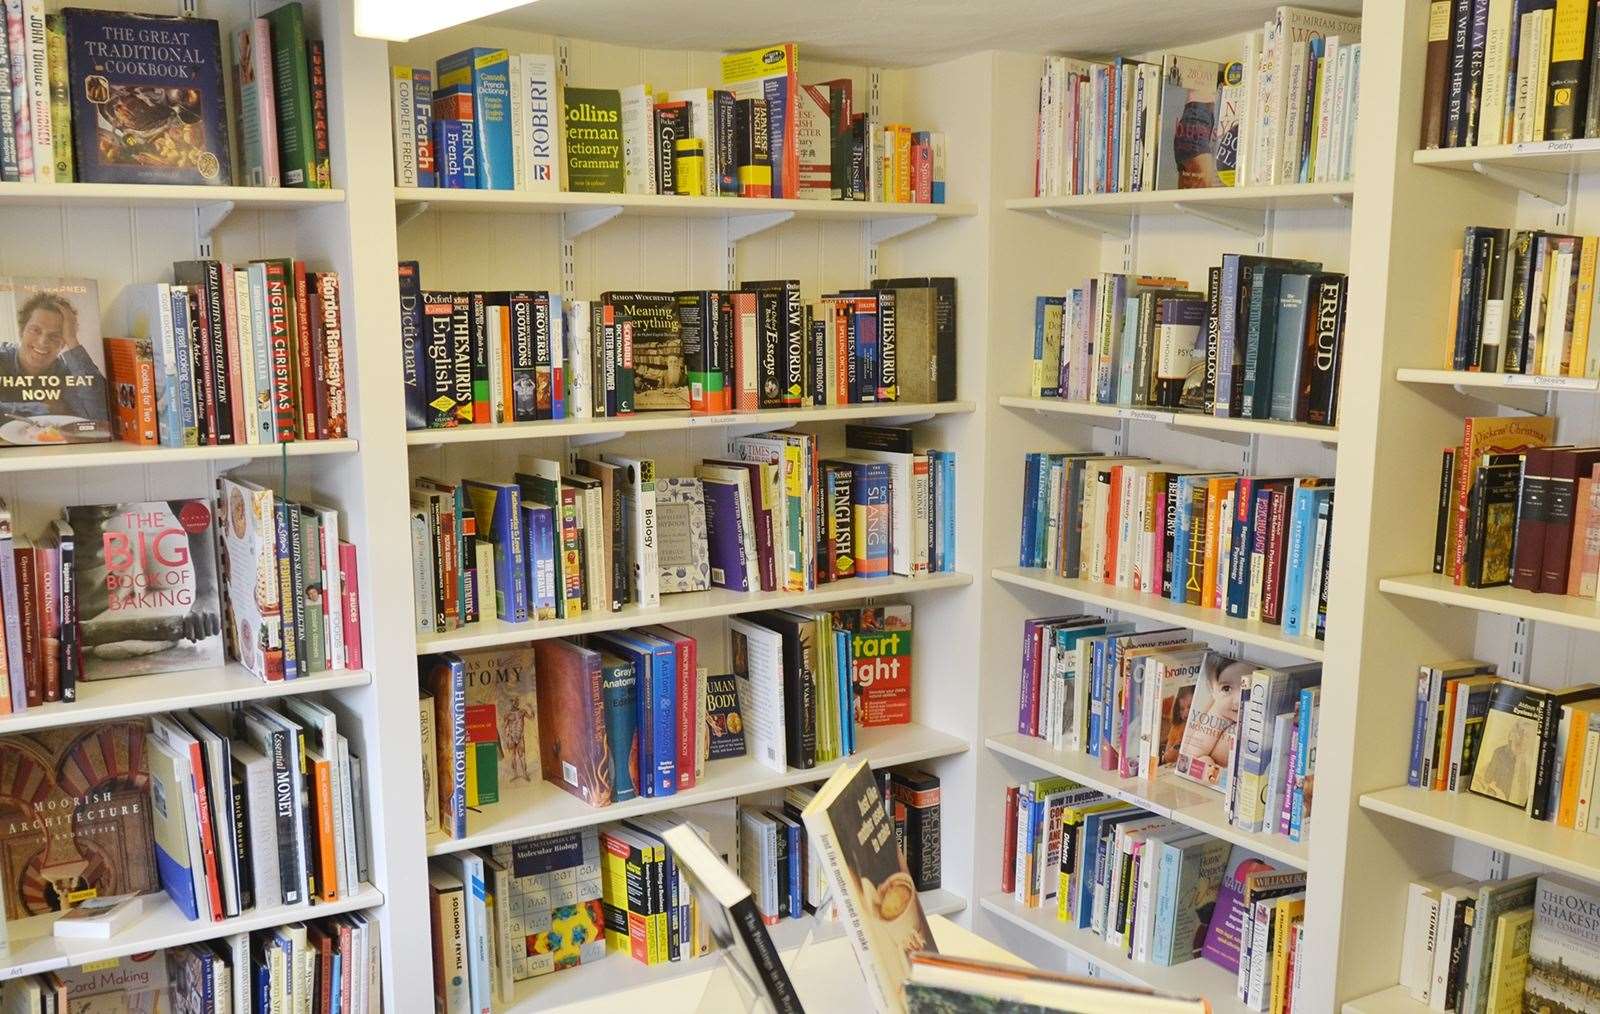 There remains, of course, a strong demand for second-hand books – which may explain the attraction of charity shops